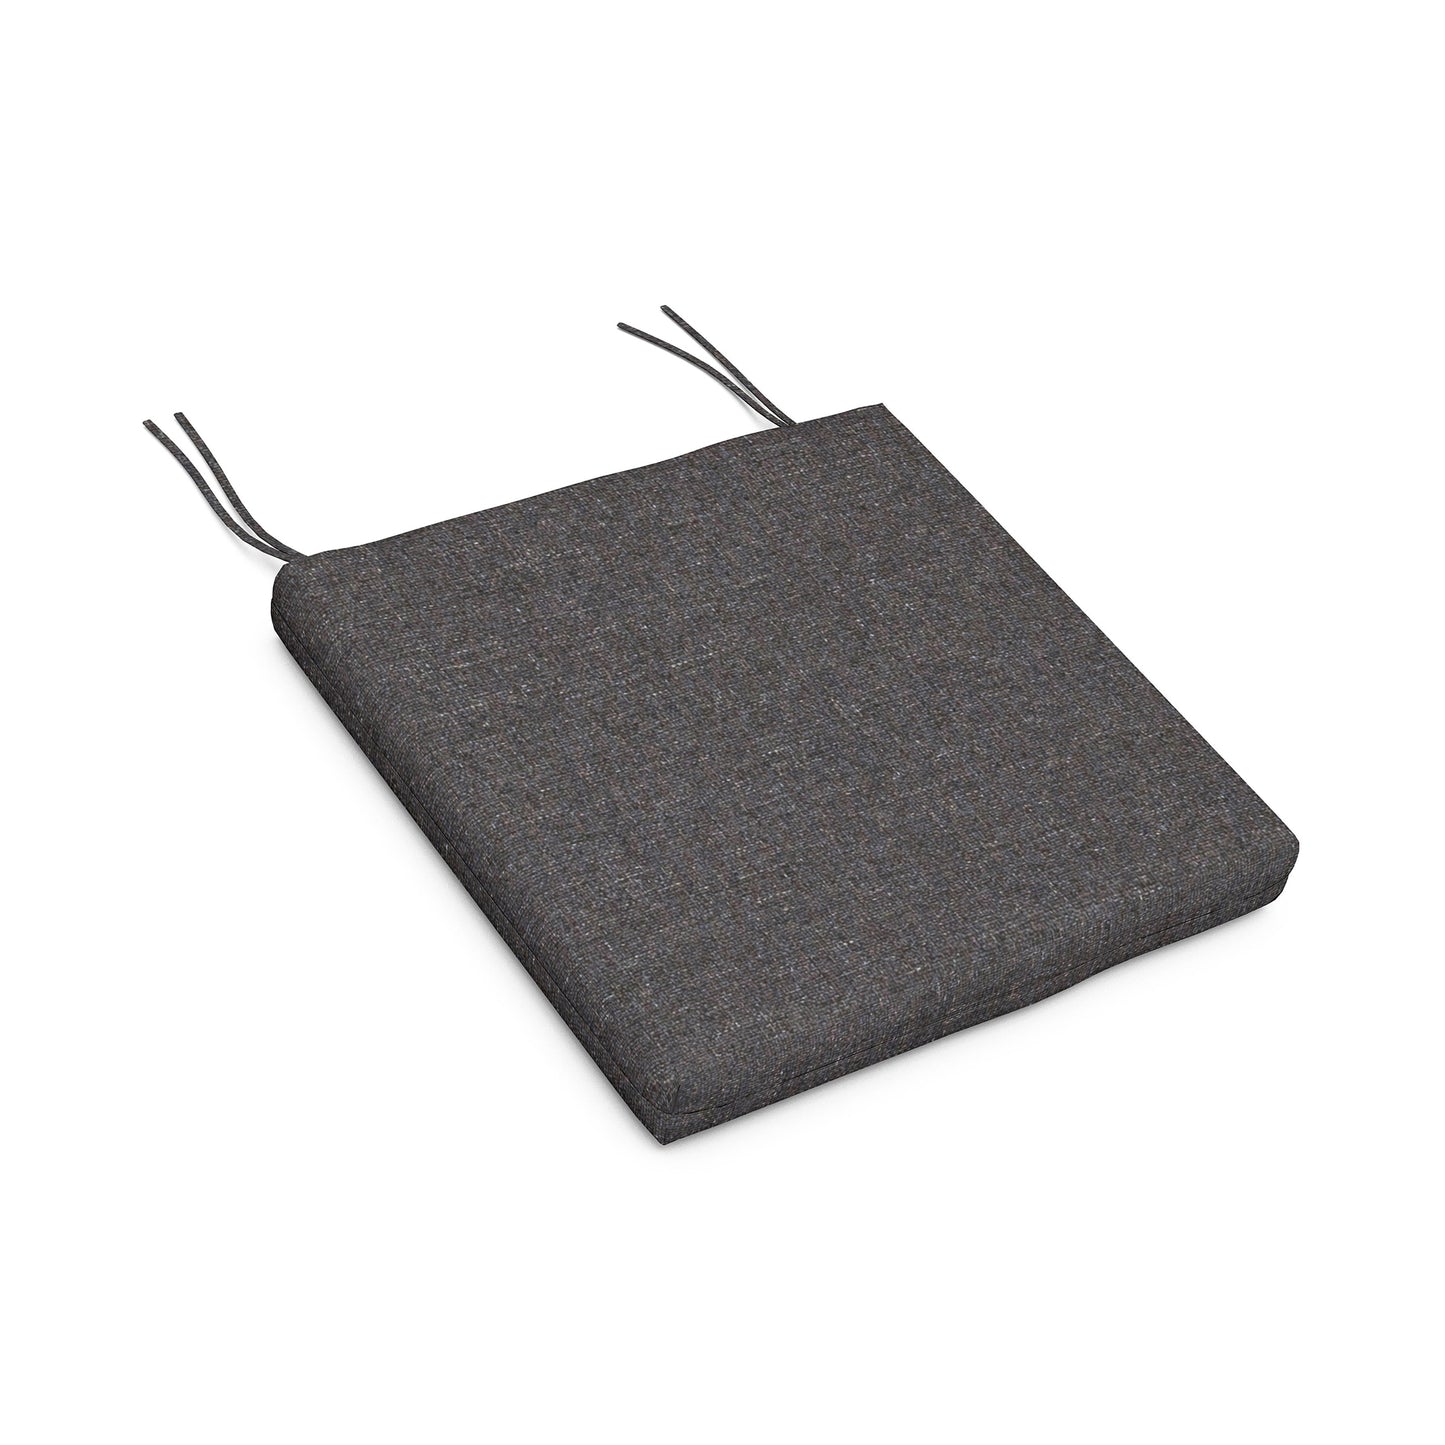 A gray square-shaped ceramic capacitor with two metallic leads on a white POLYWOOD® seat cushion background.